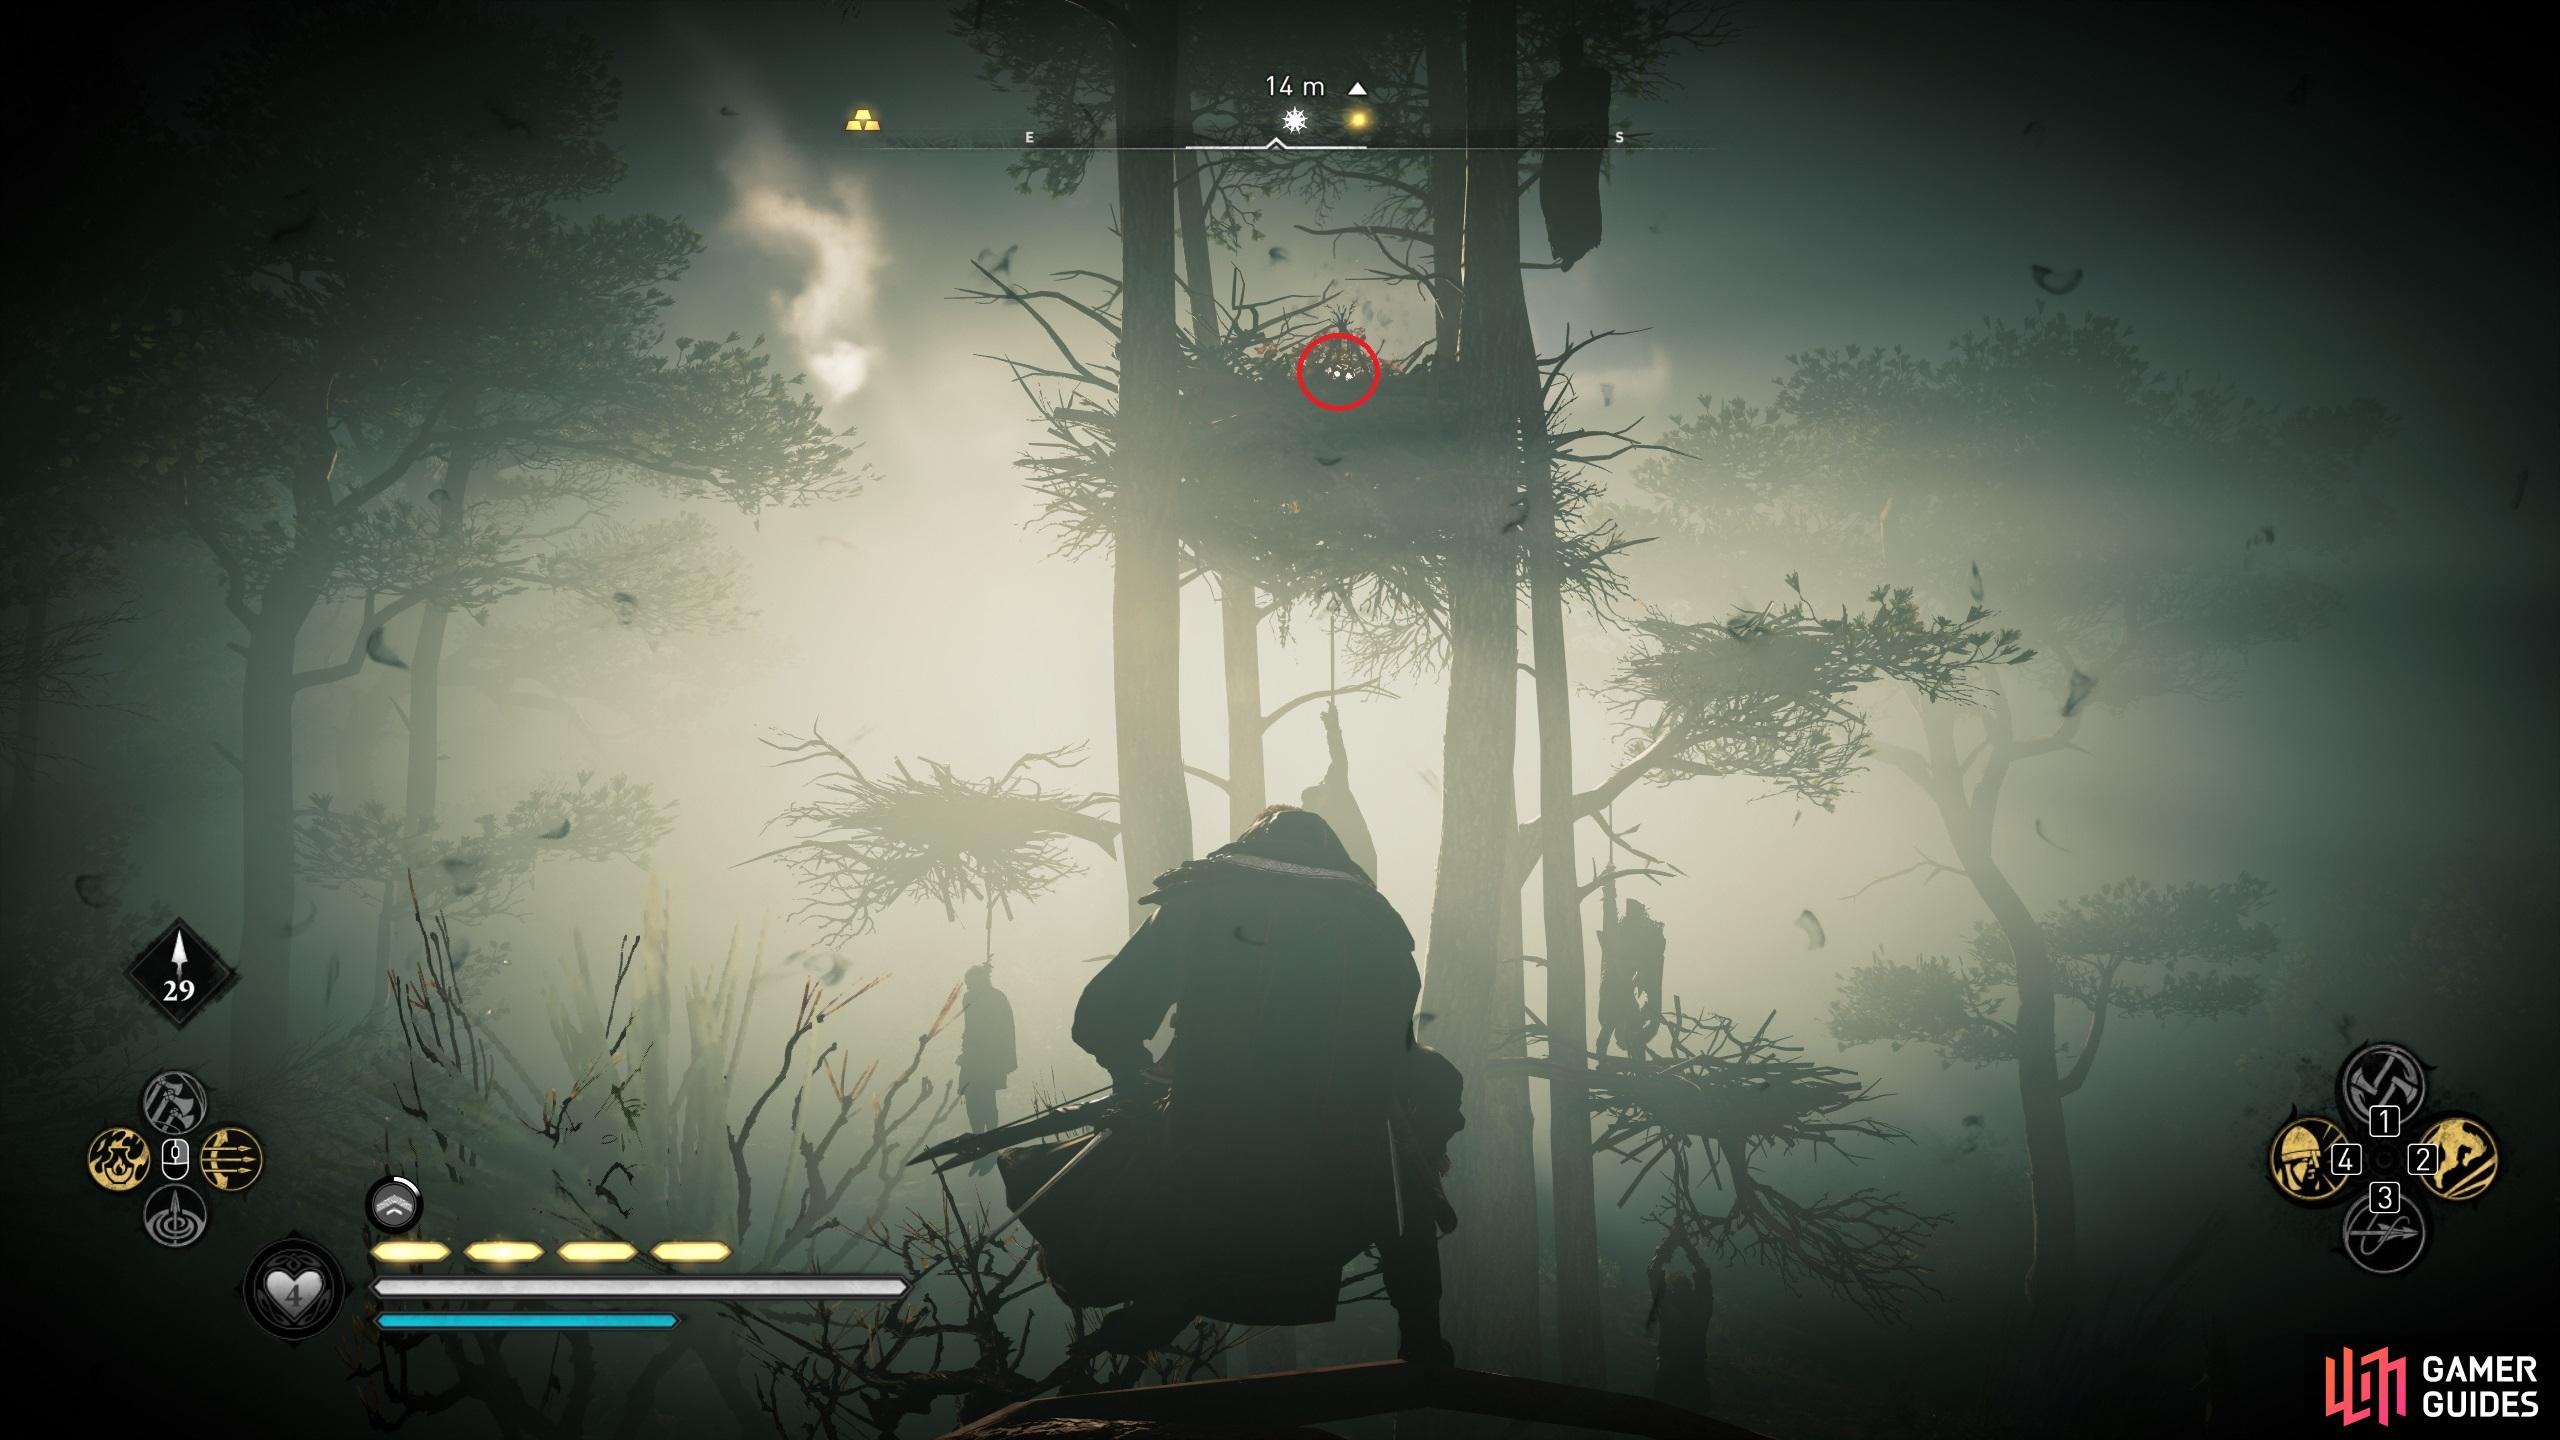 Once youve reached the vantage point, youll be able to shoot the symbol from the branch.